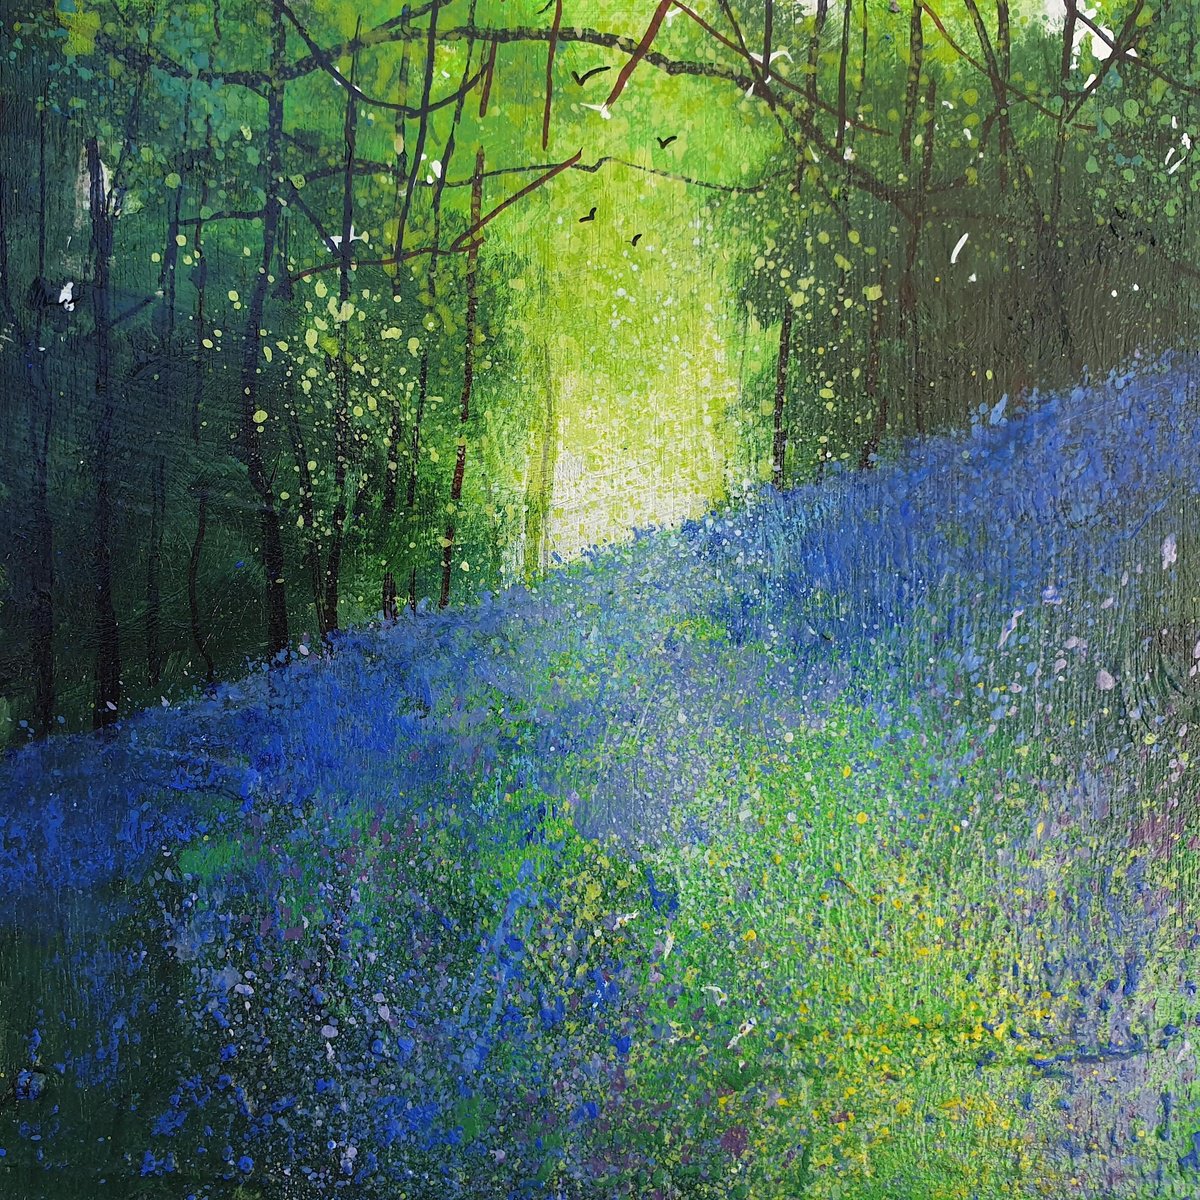 Seasons - Spring  Bluebells on a  Woodland Bank by Teresa Tanner